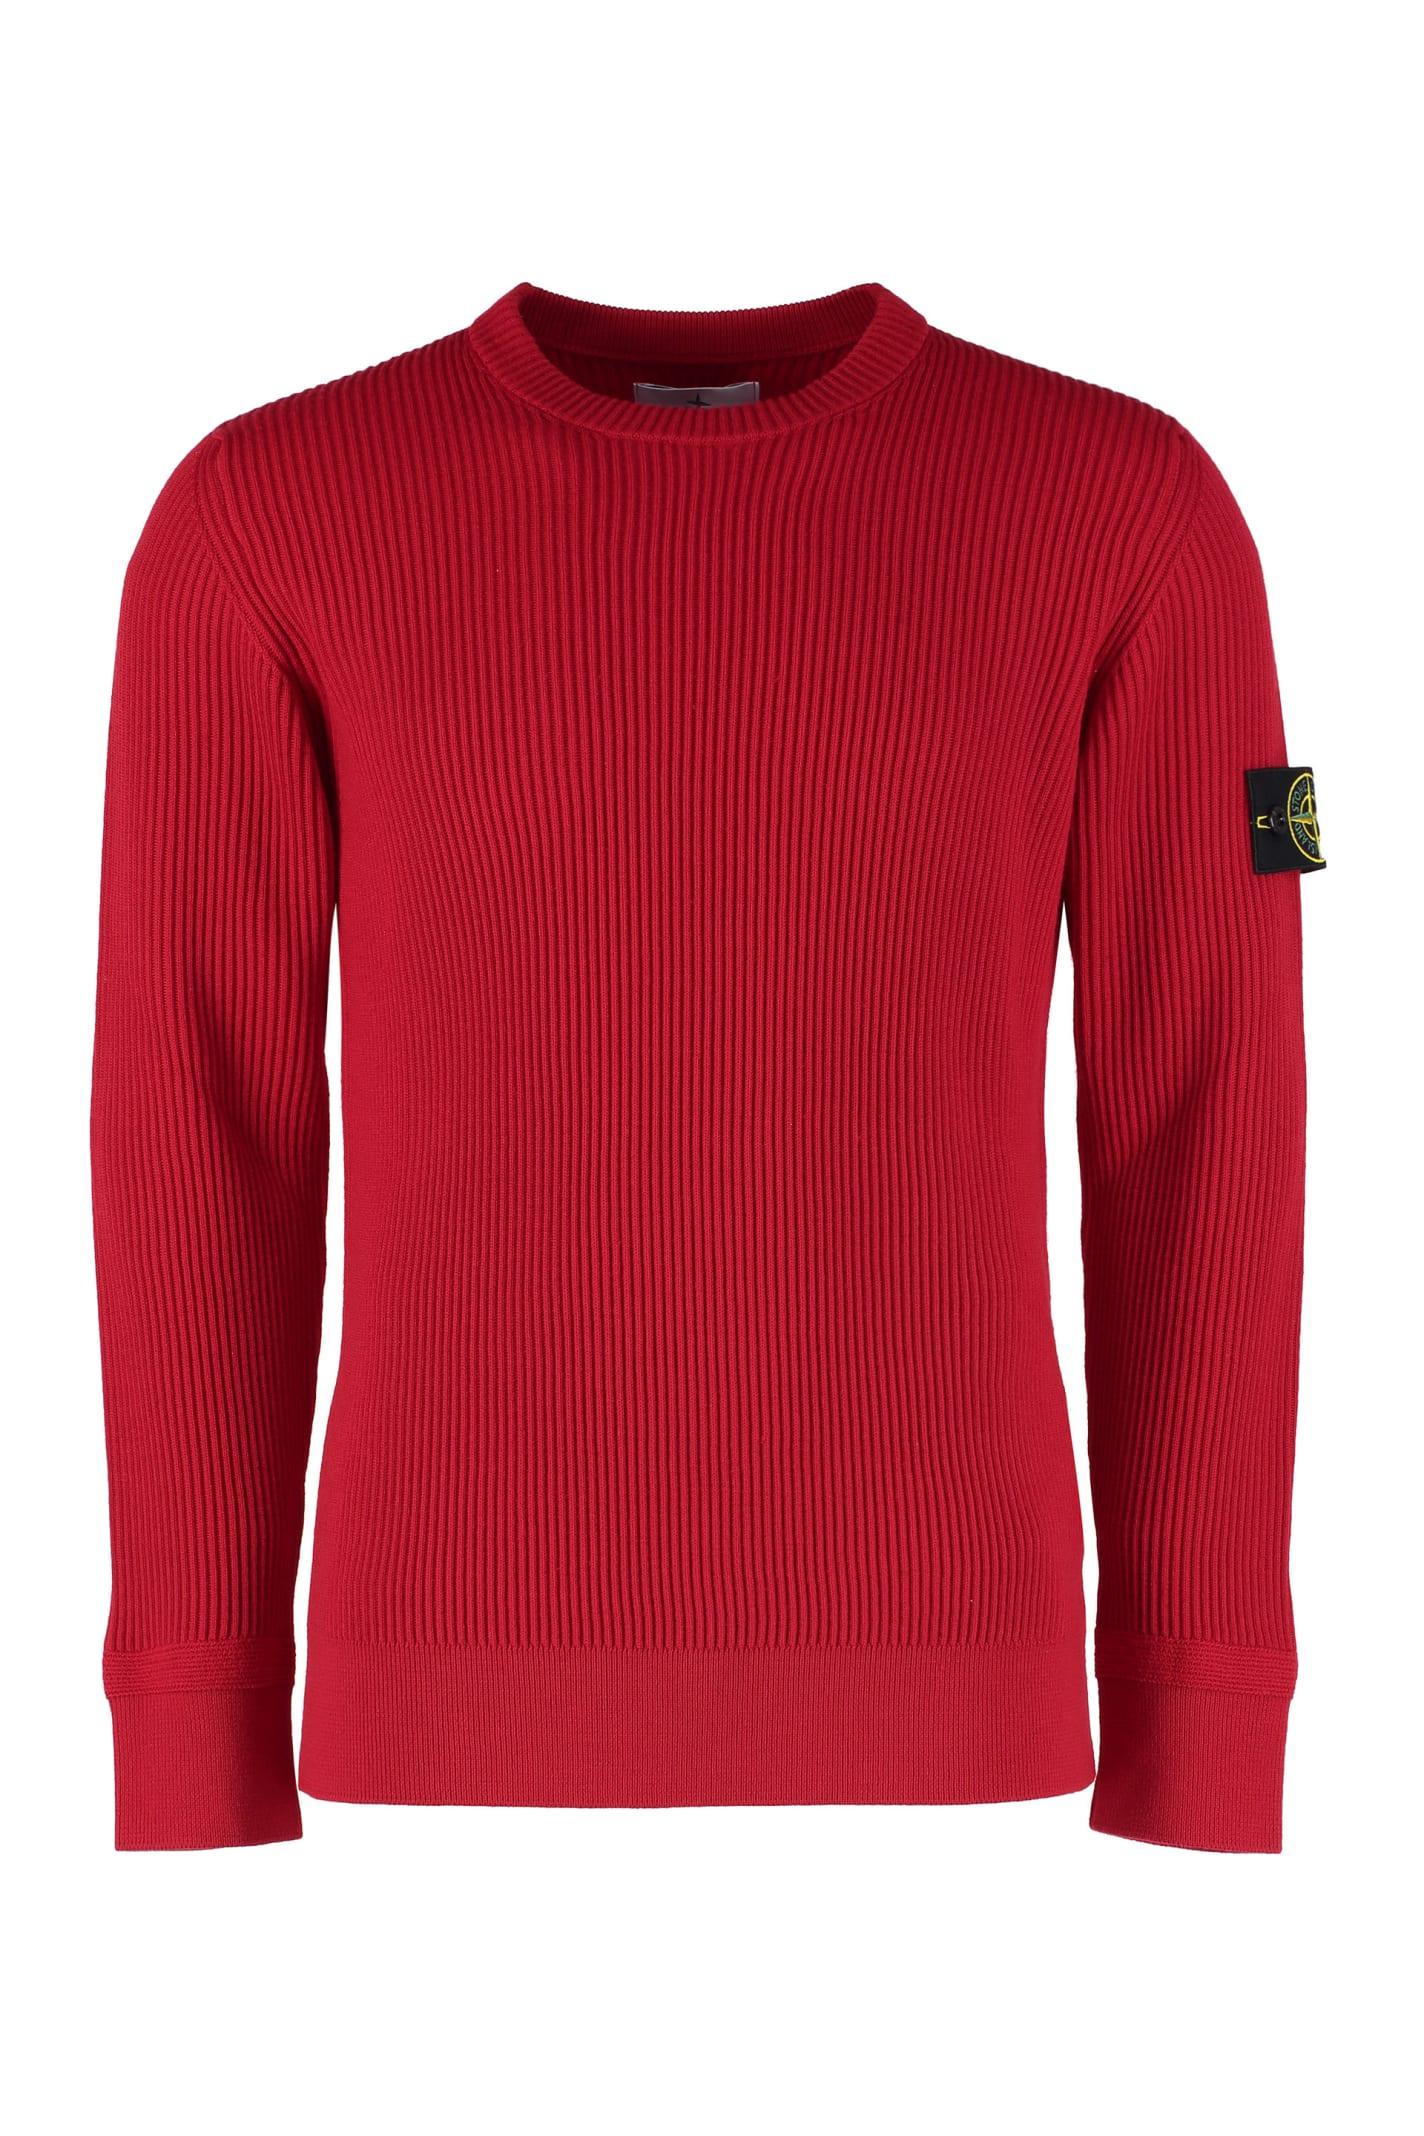 Stone Island Ribbed Wool Sweater in Red for Men | Lyst